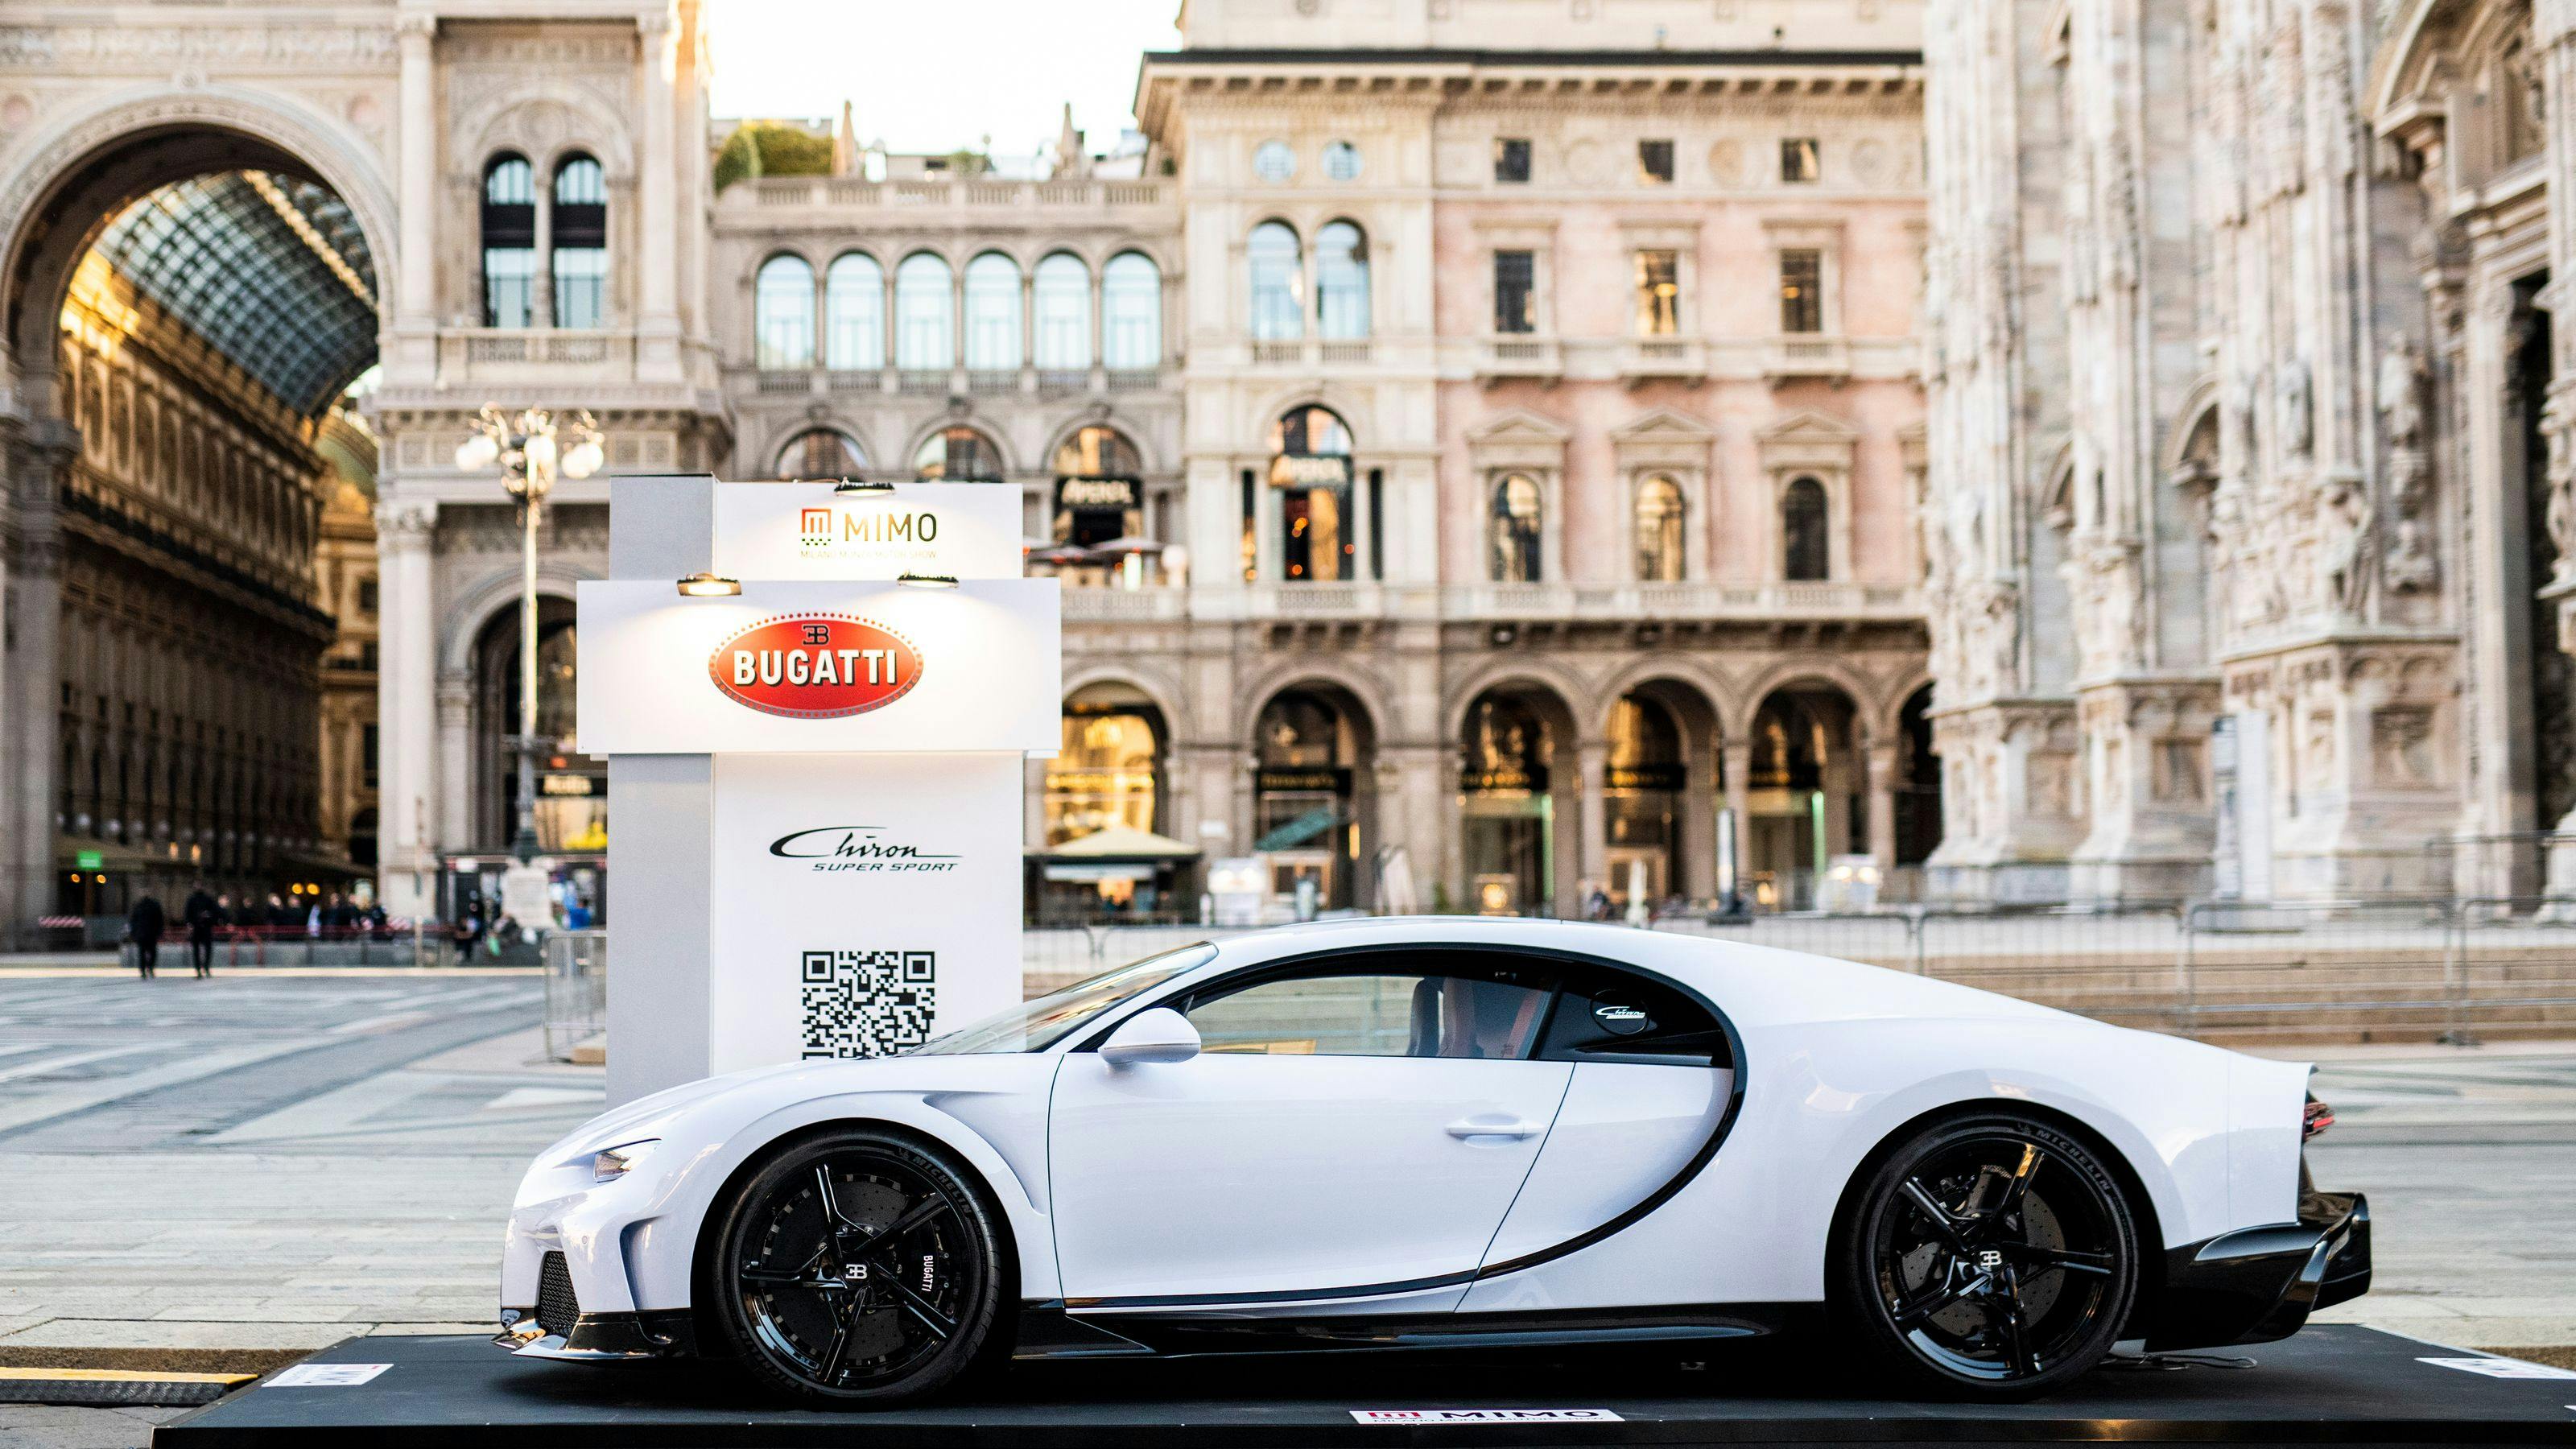 The Bugatti Chiron Super Sport – First Public Appearance at the Milano Monza Motor Show